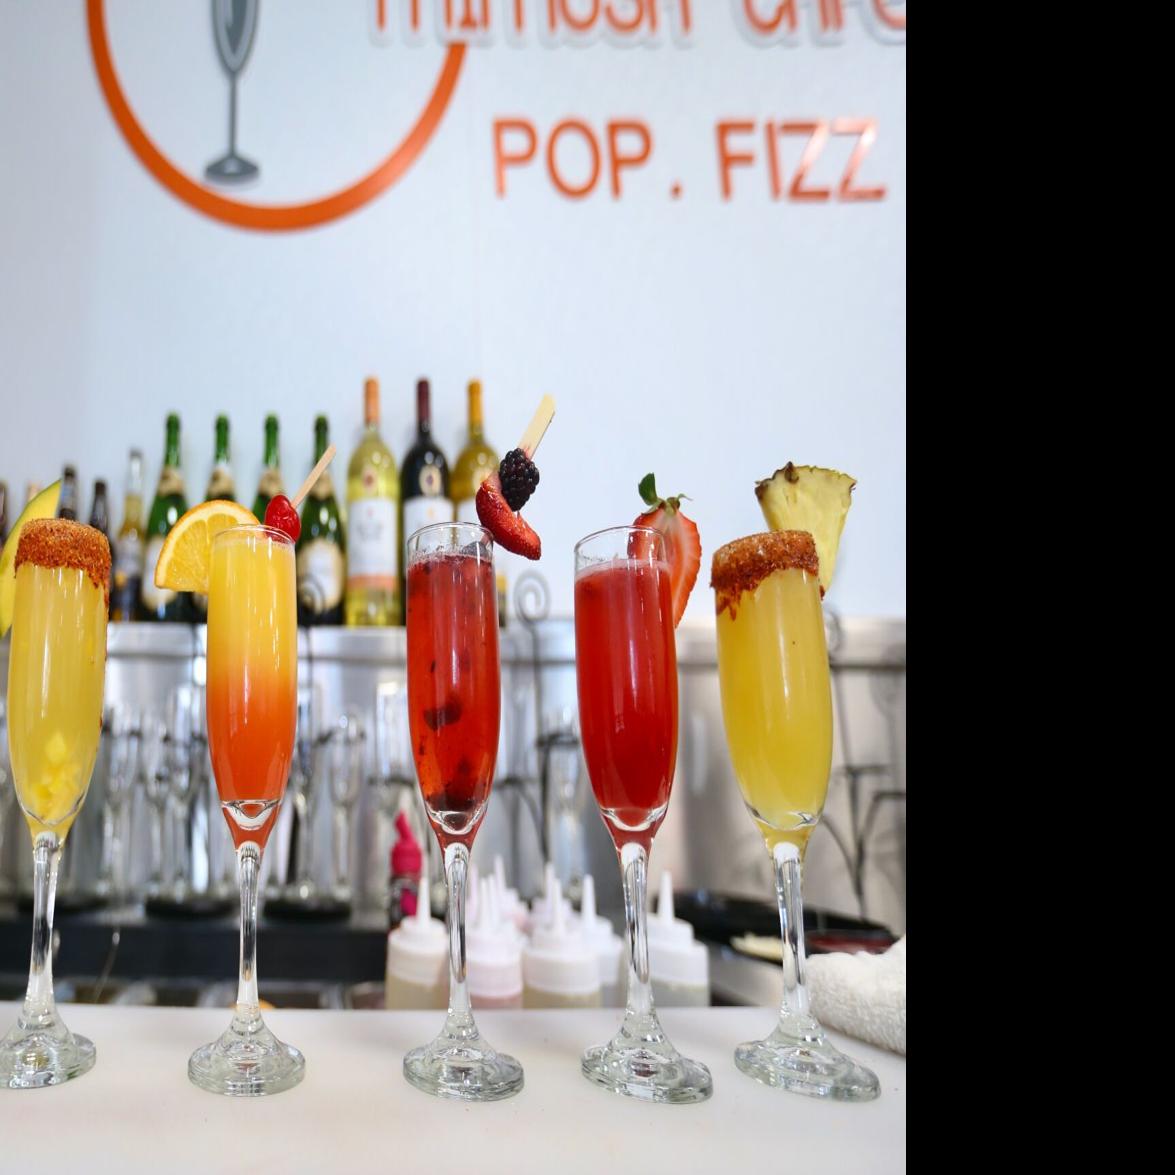 Best mimosa brunch deals, from a $2 glass to a $60 mimosa tower